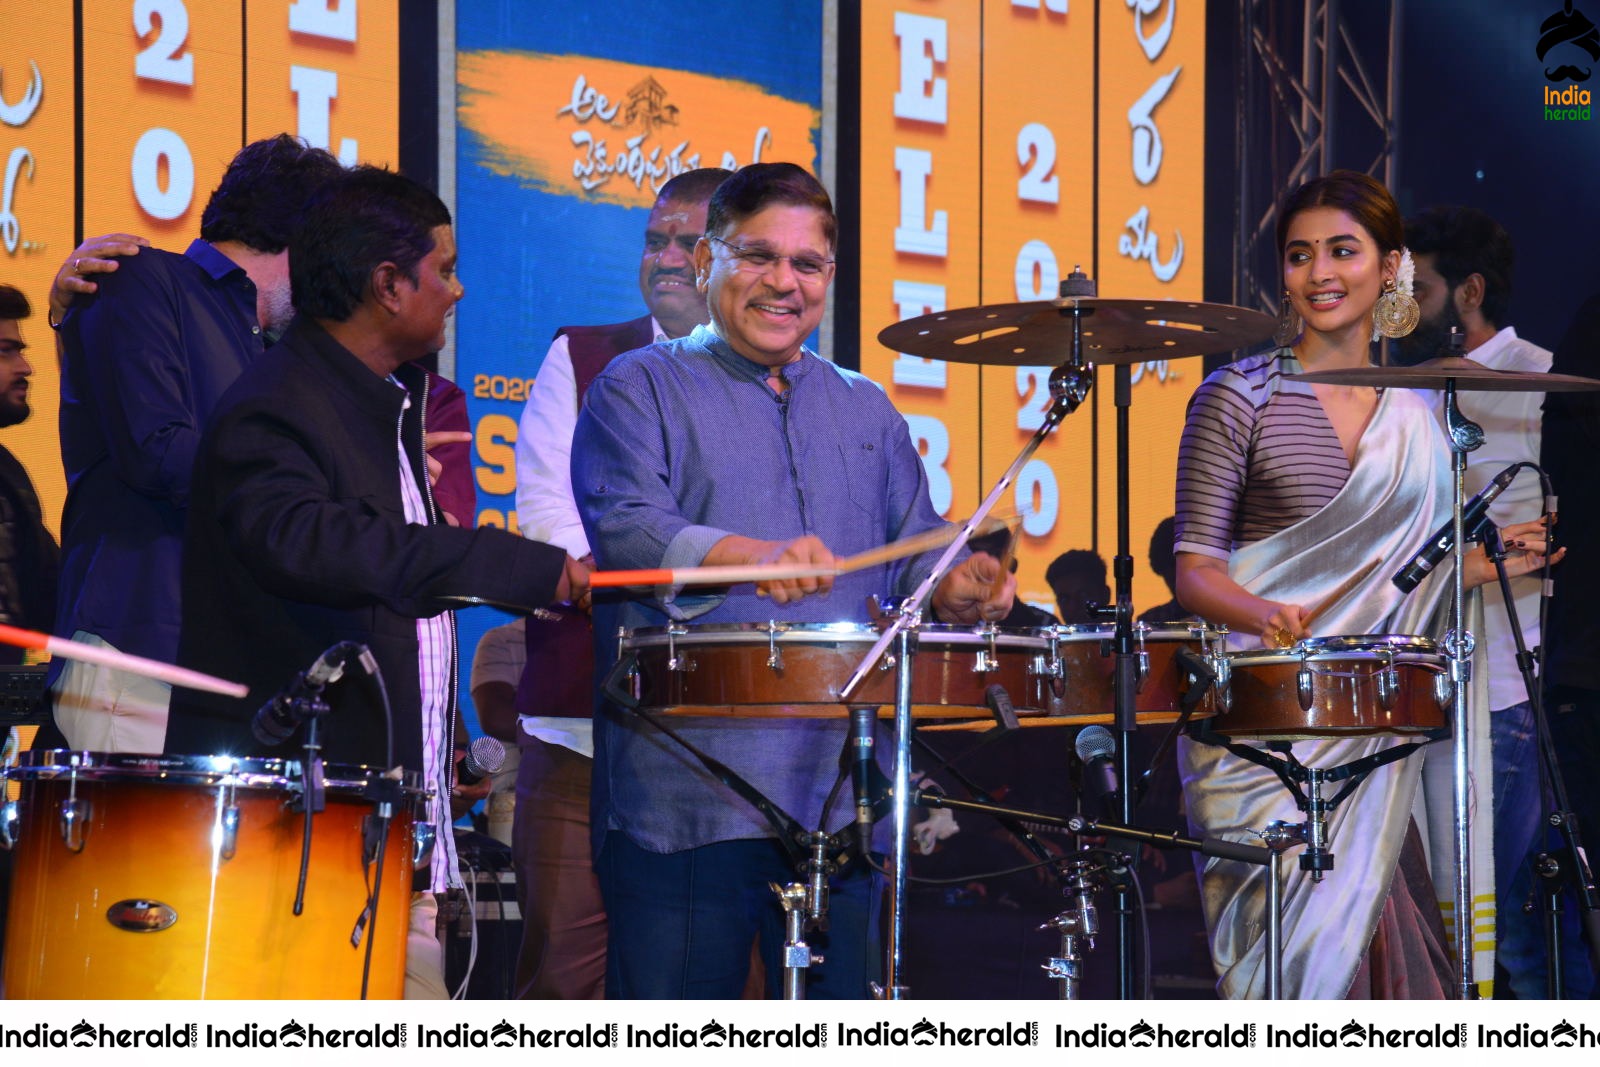 When Pooja Hegde started playing drums along with Sivamani Set 2